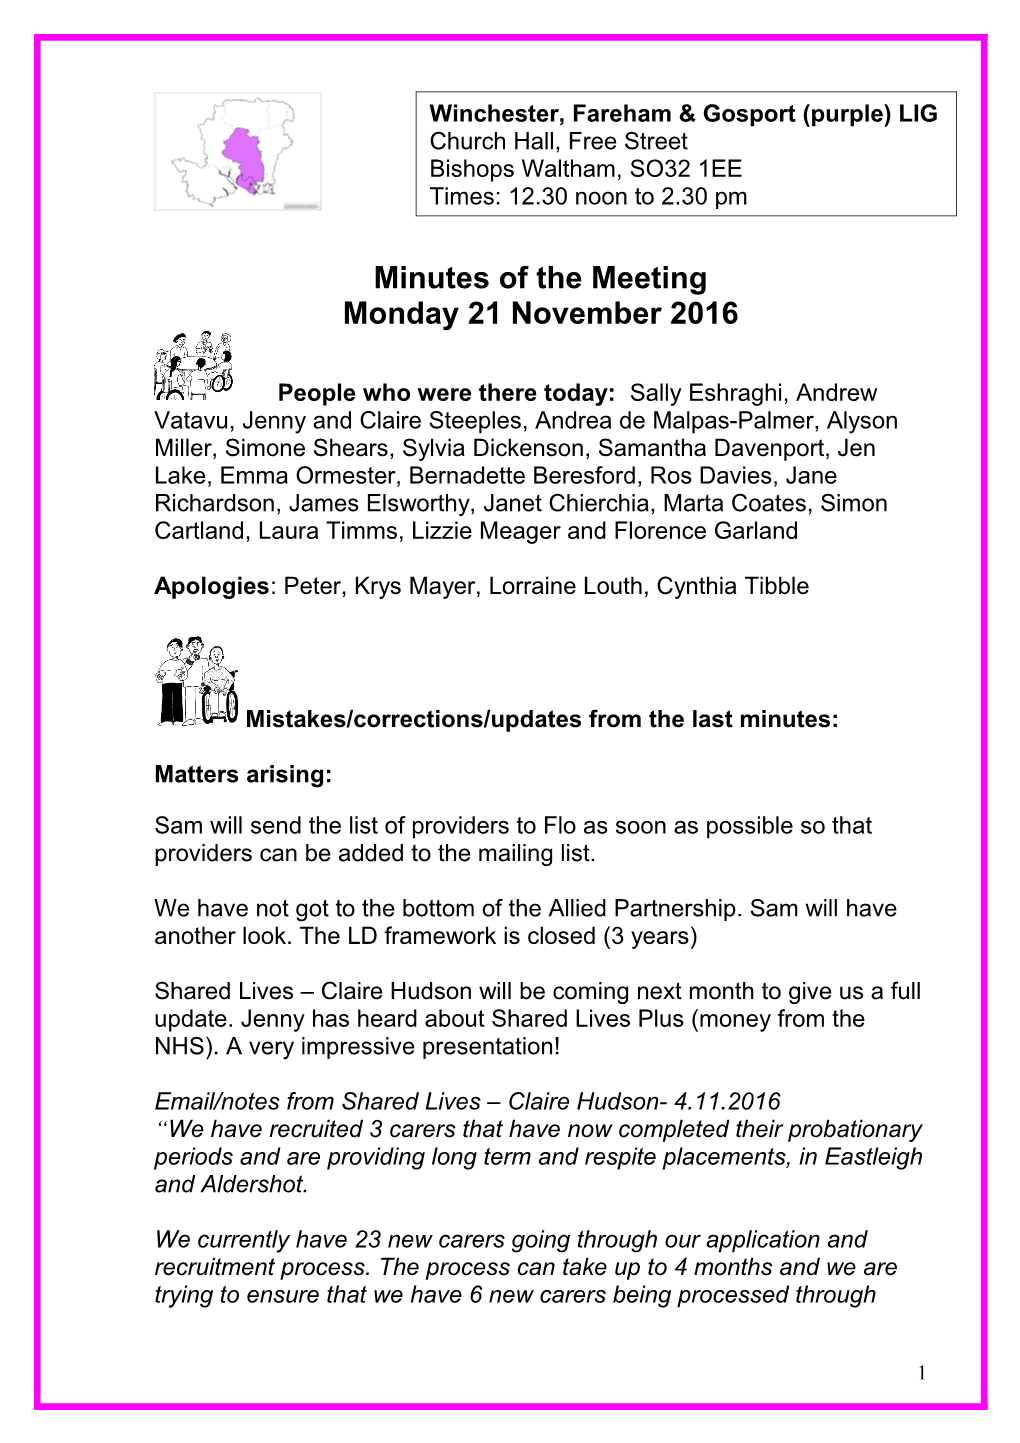 Minutes of the Meeting s8